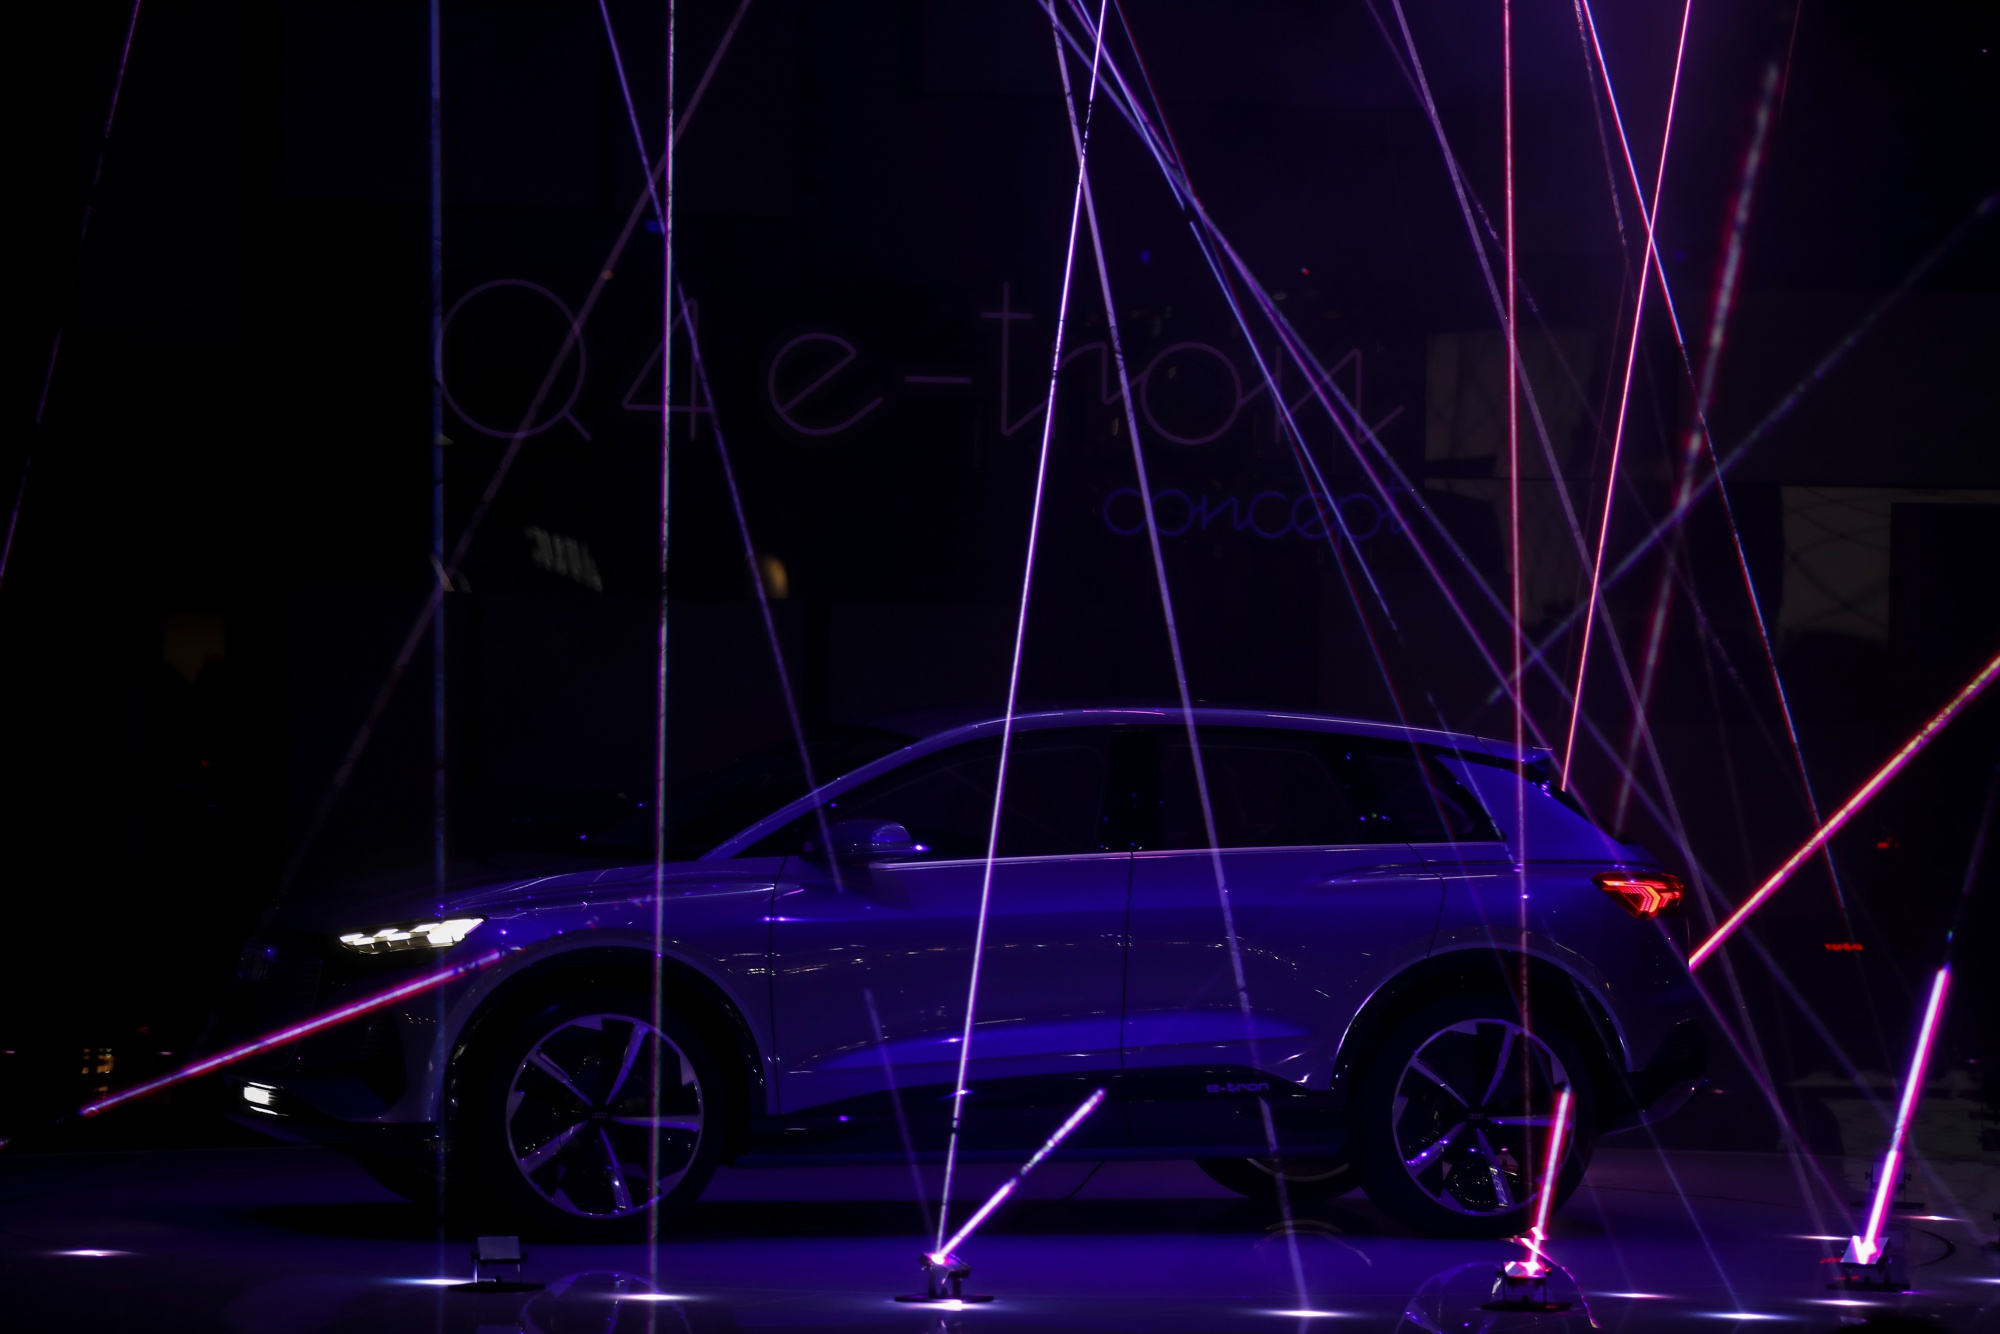 Audi’s Q4 e-tron concept SUV. The new Q4 e-tron will be unveiled Wednesday evening.